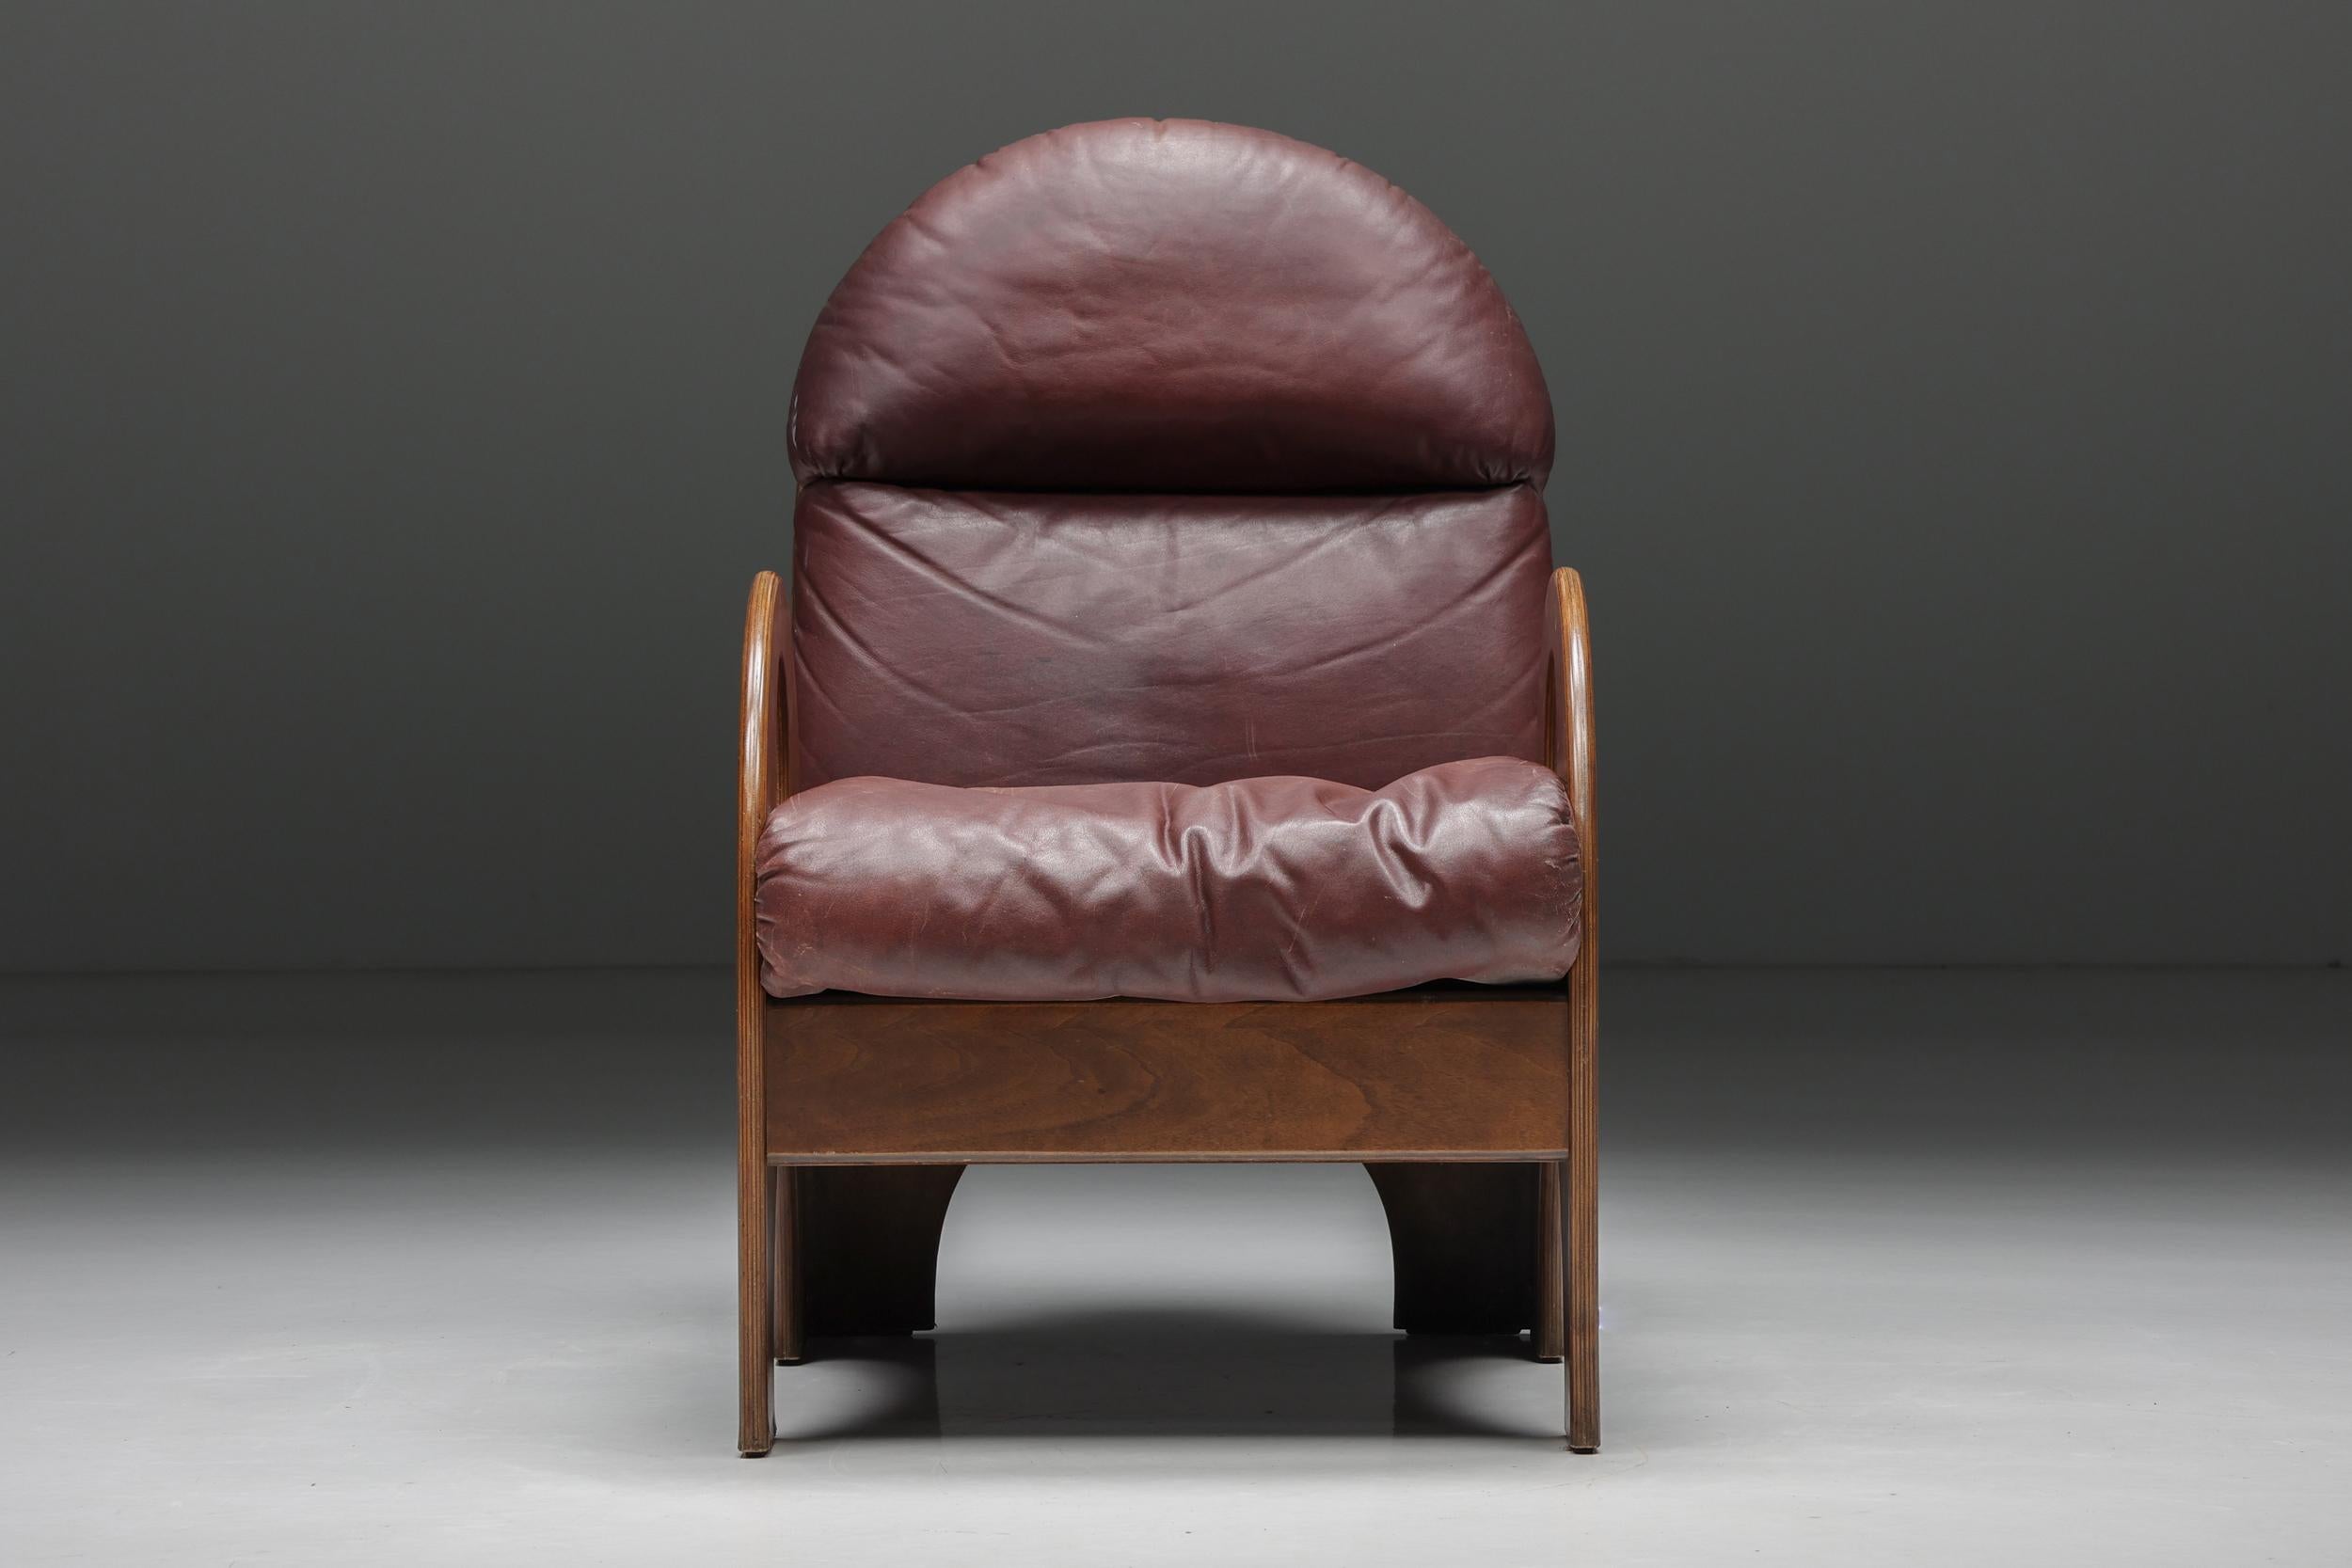 Gae Aulenti Arcata Easy Chair in Walnut and Burgundy Leather, 1960s For Sale 2